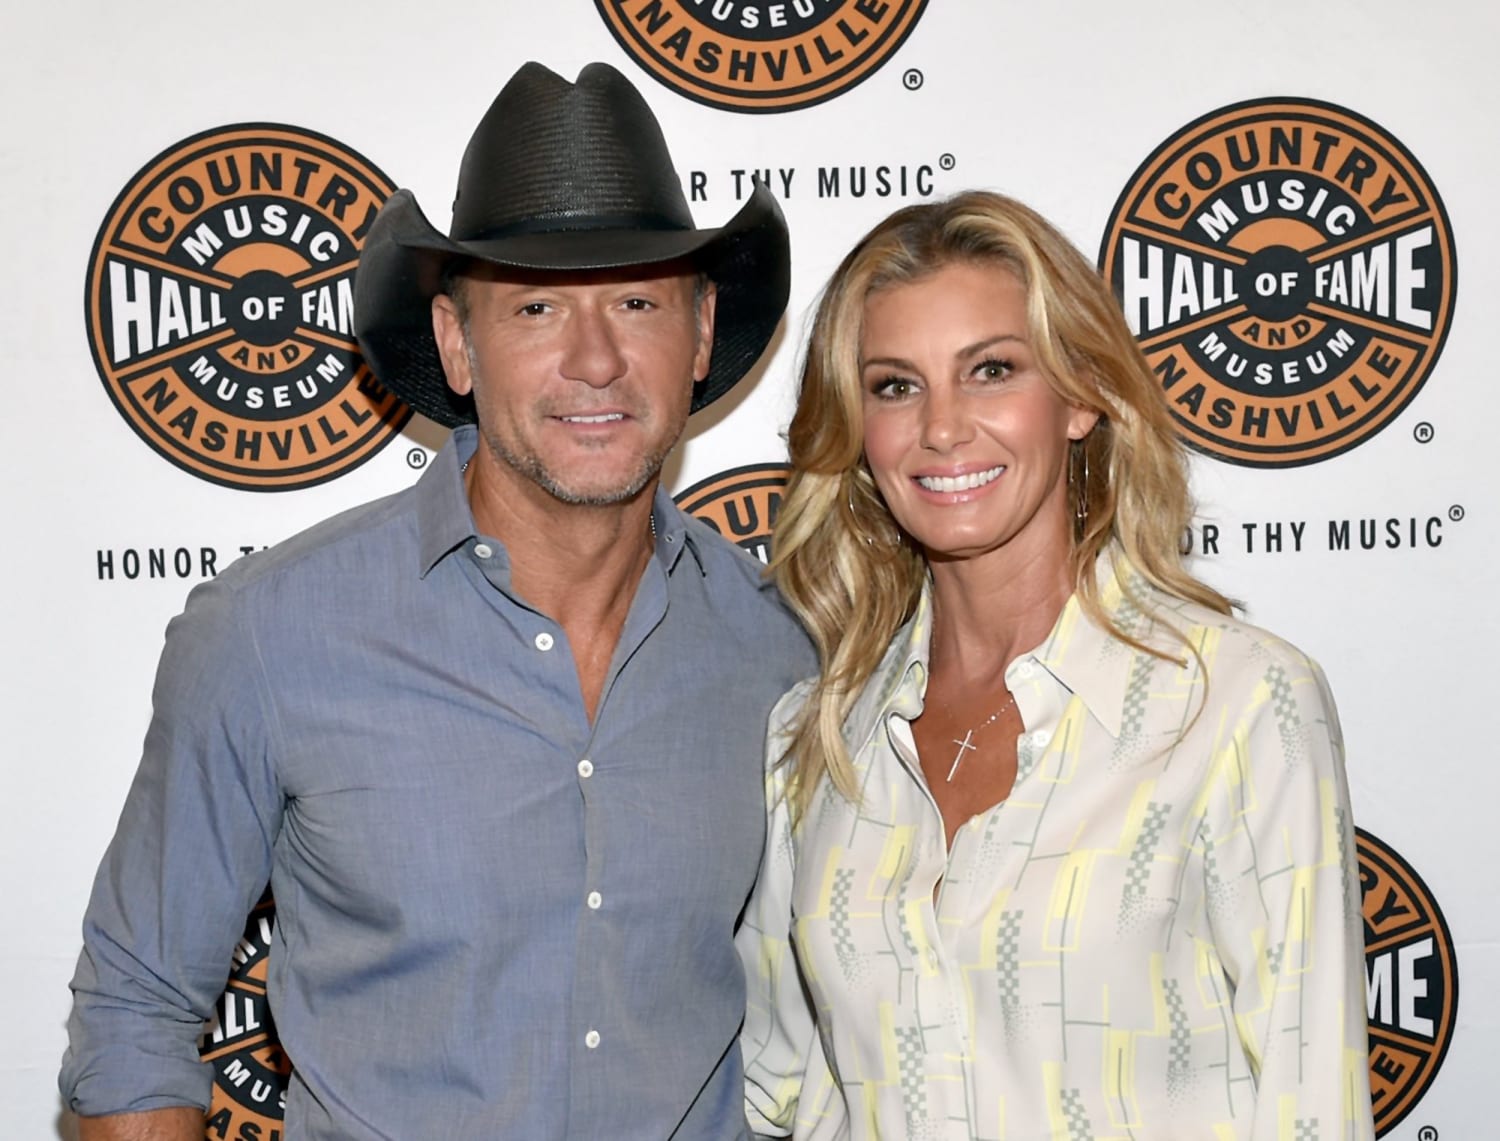 Tim McGraw's new book, 'Grit and Grace,' details family and fitness